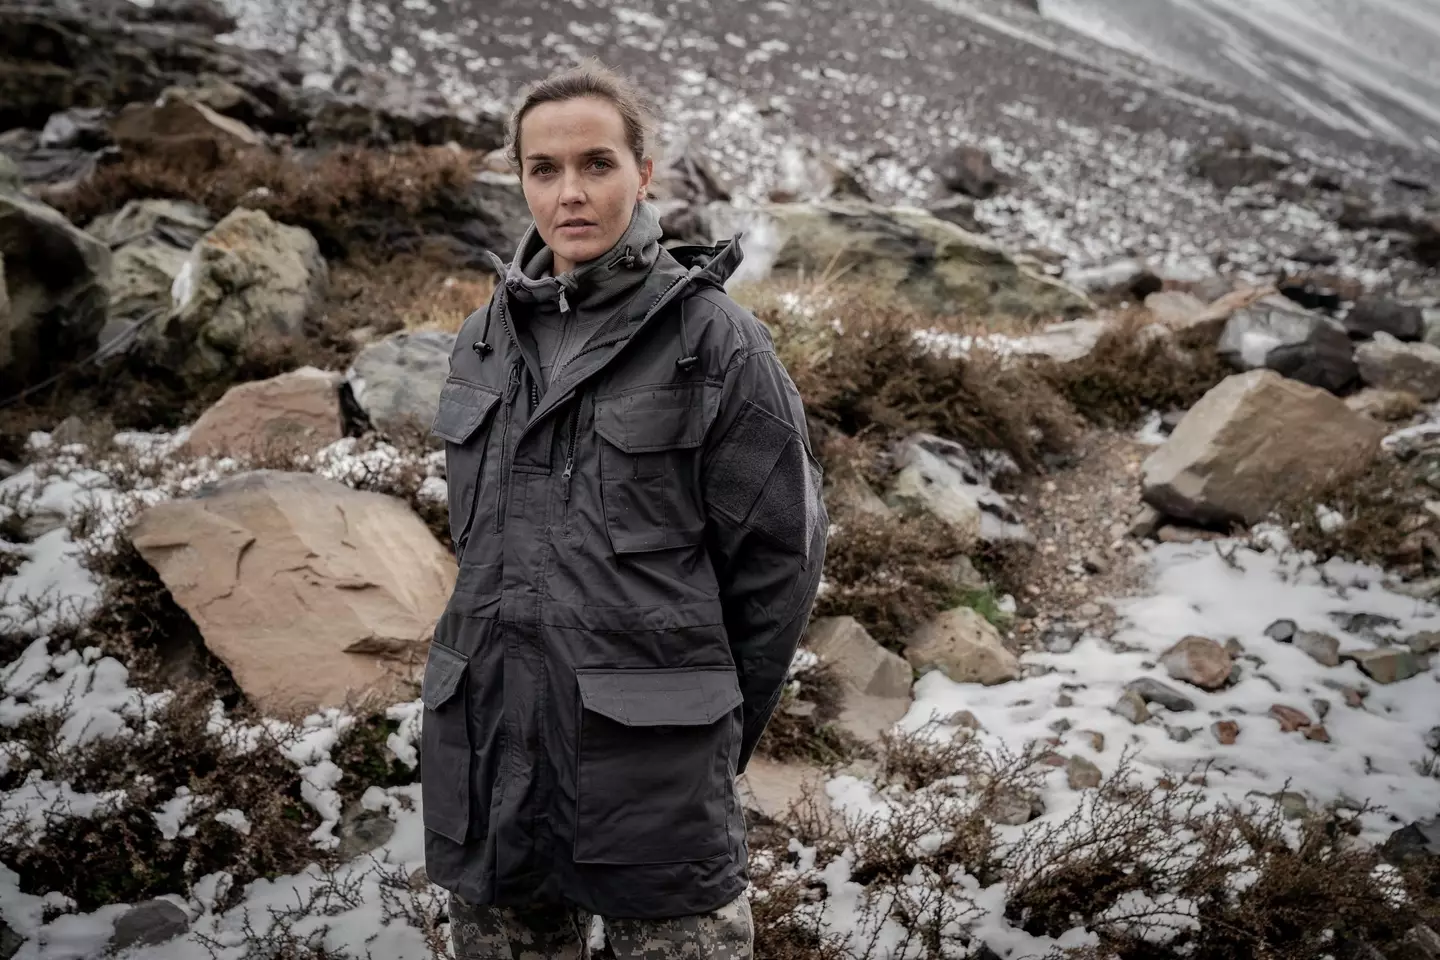 Victoria Pendleton took part in the show because of her brother.